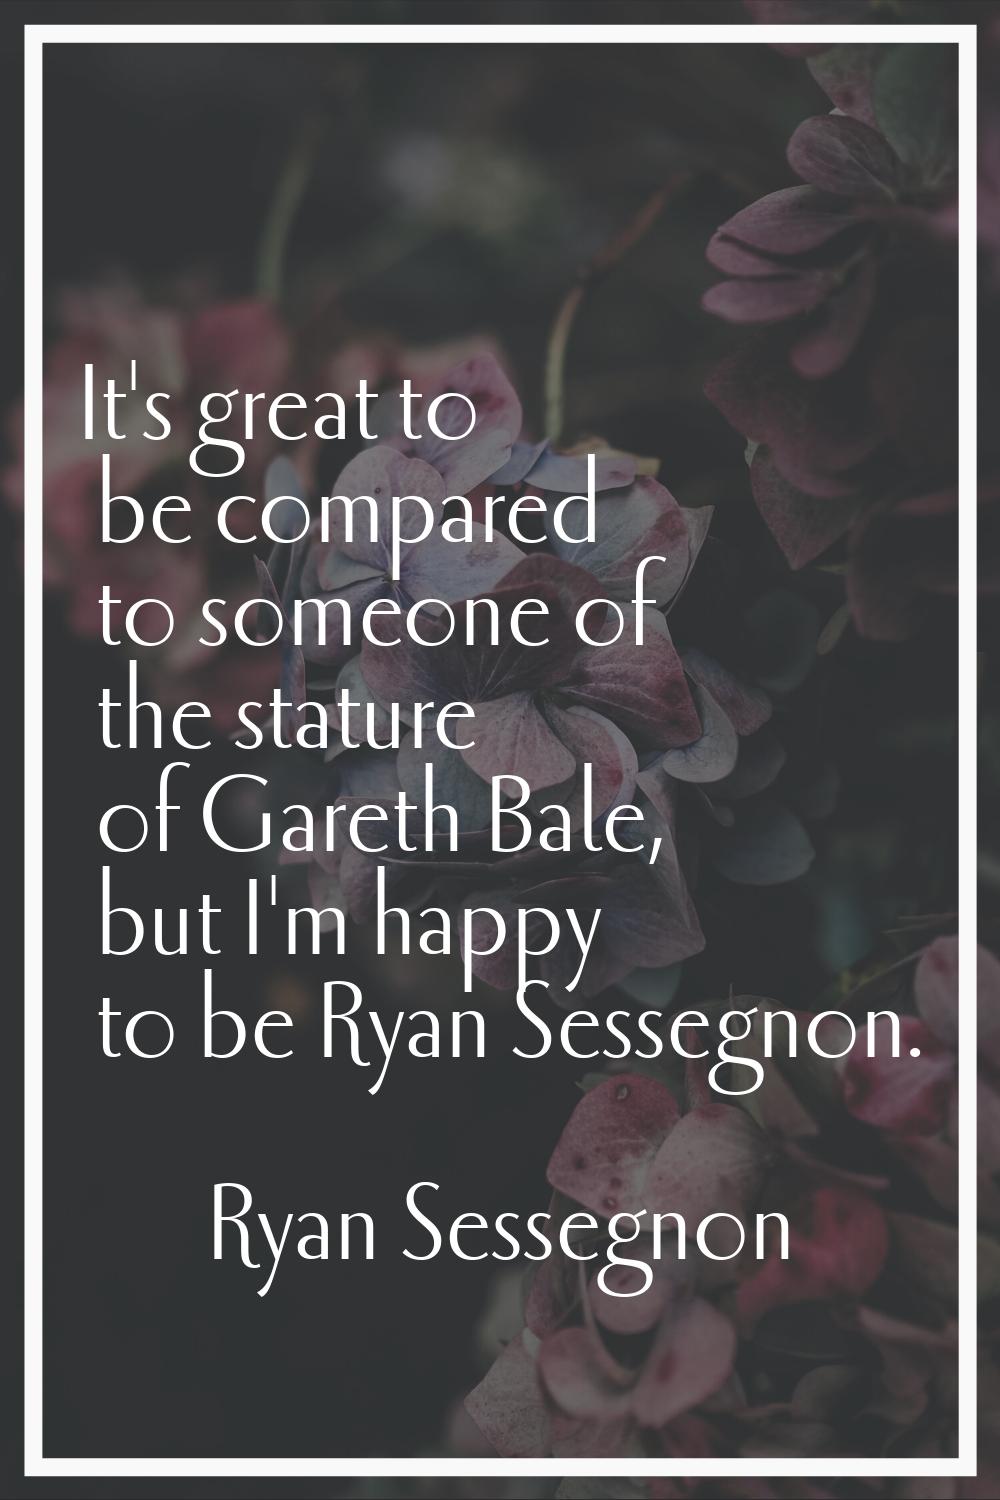 It's great to be compared to someone of the stature of Gareth Bale, but I'm happy to be Ryan Sesseg